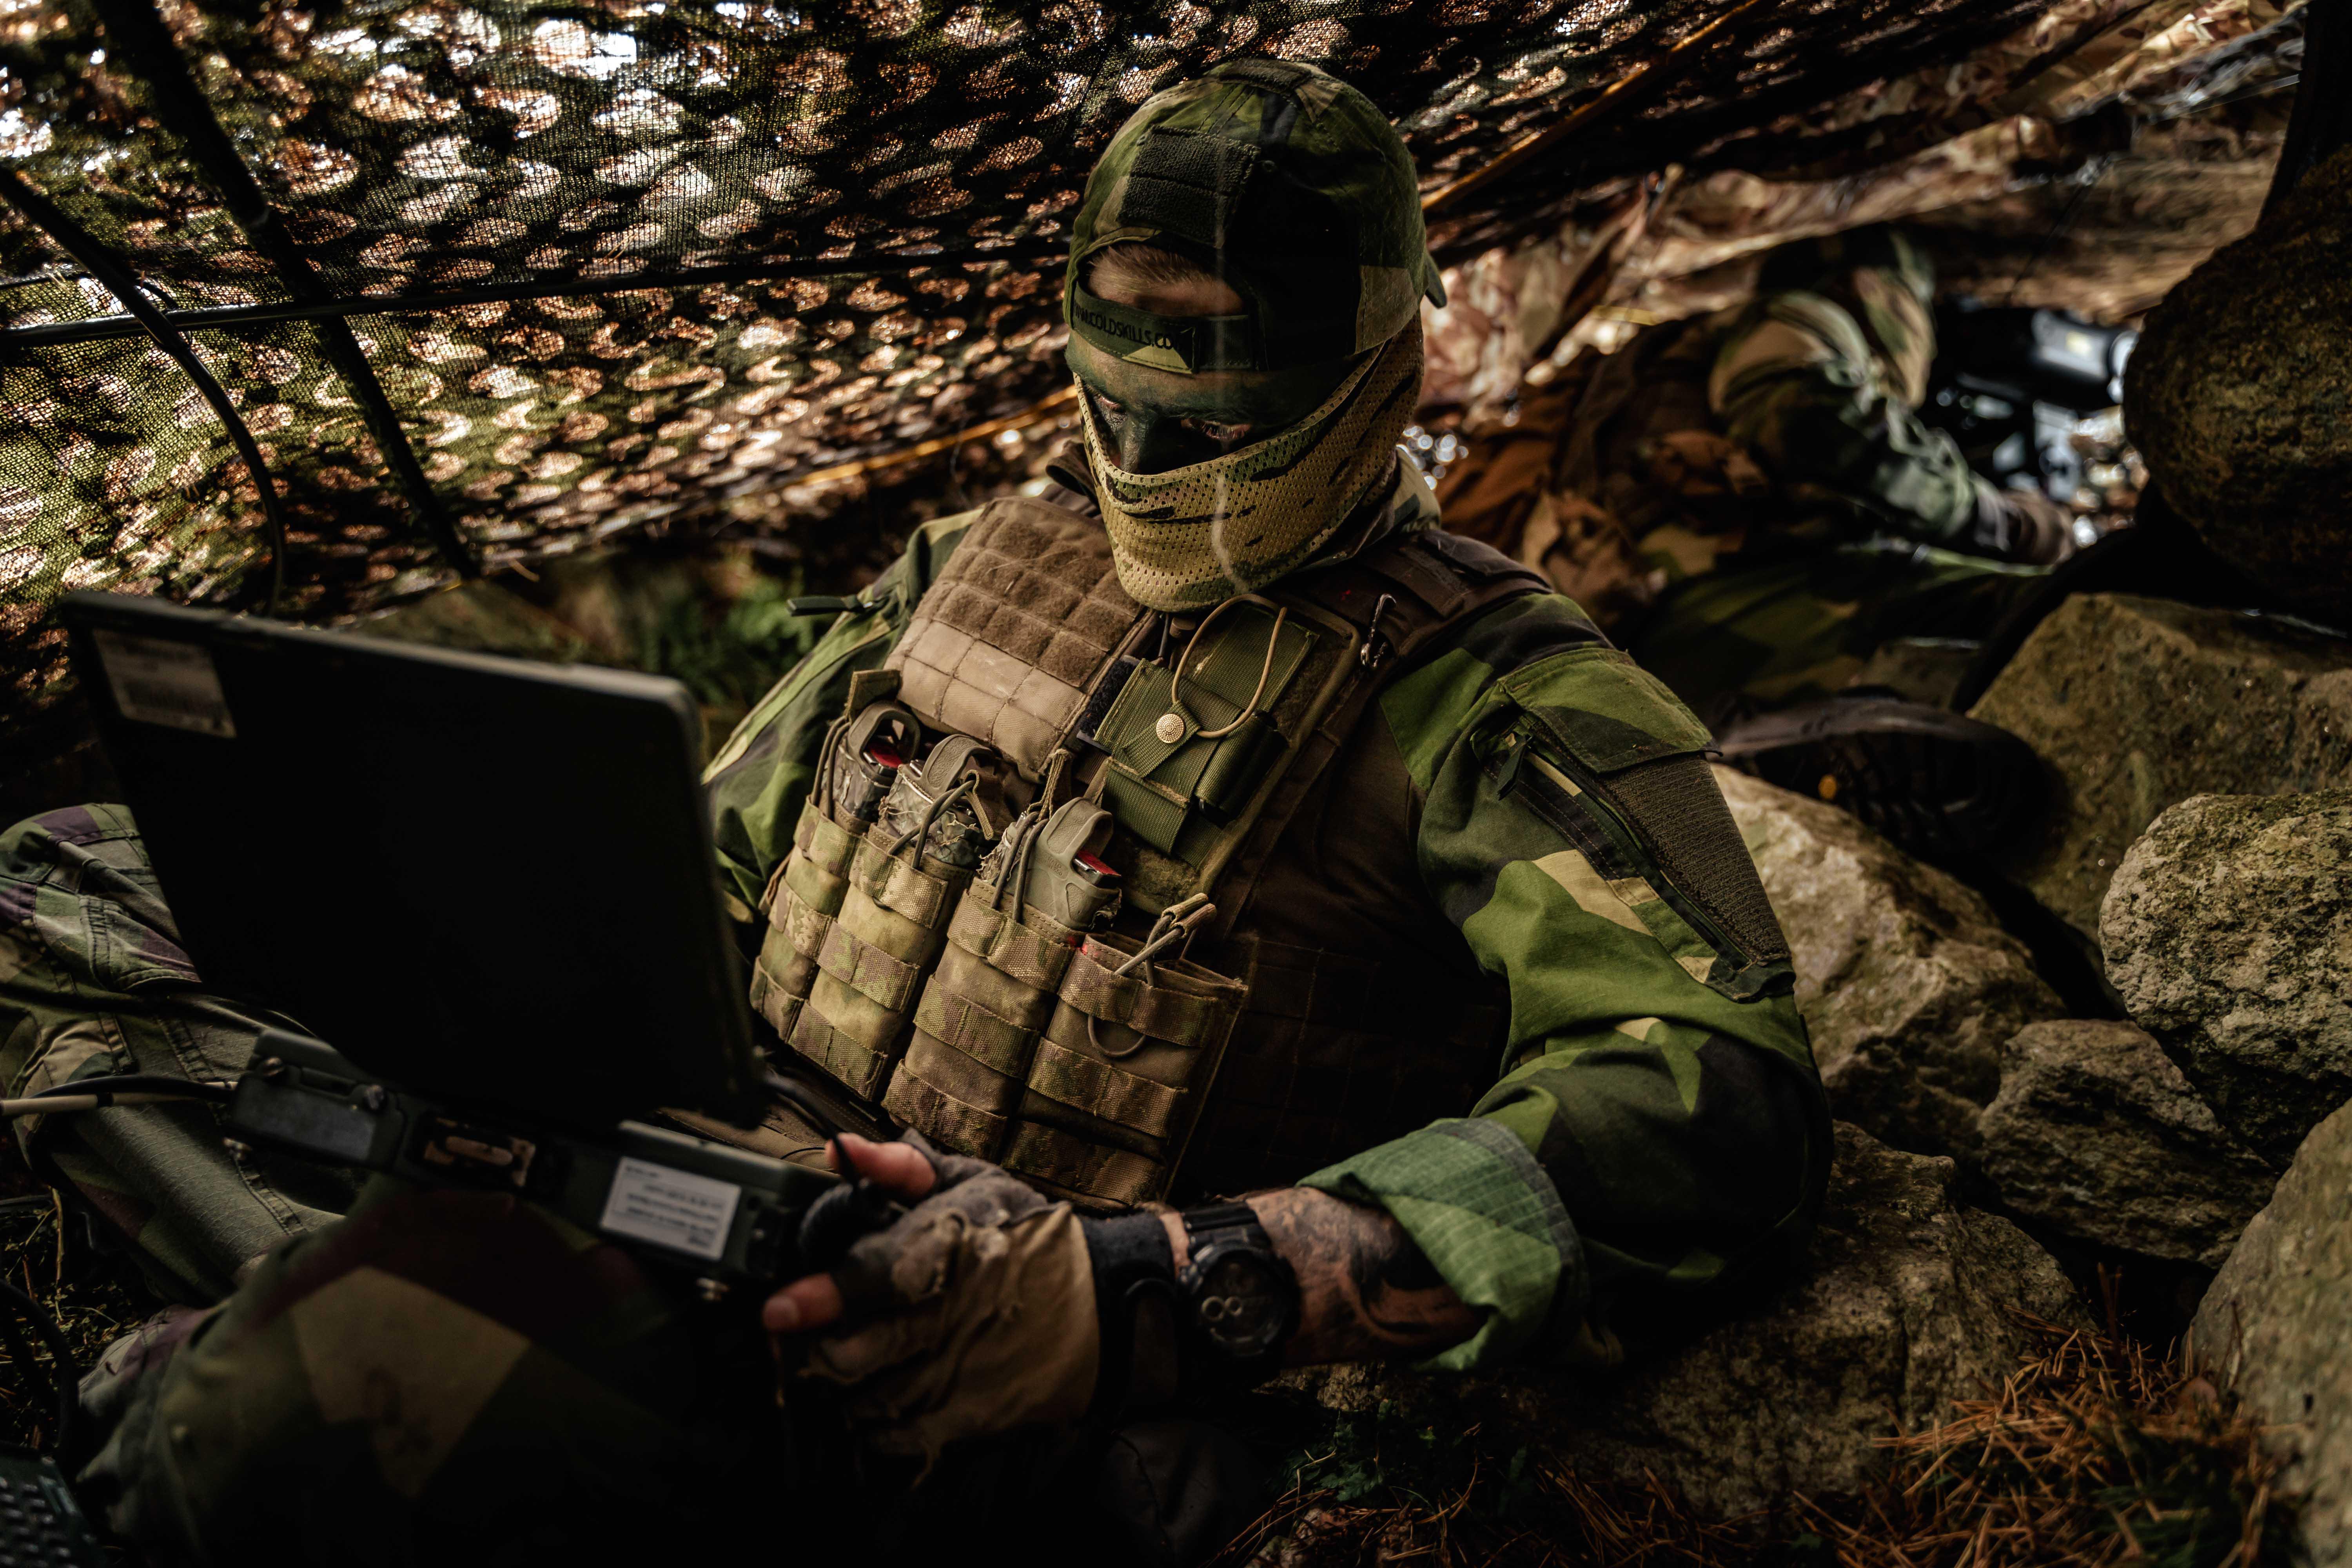 Image shows RAF Regiment using computer inside temporary multi-terrain structure.